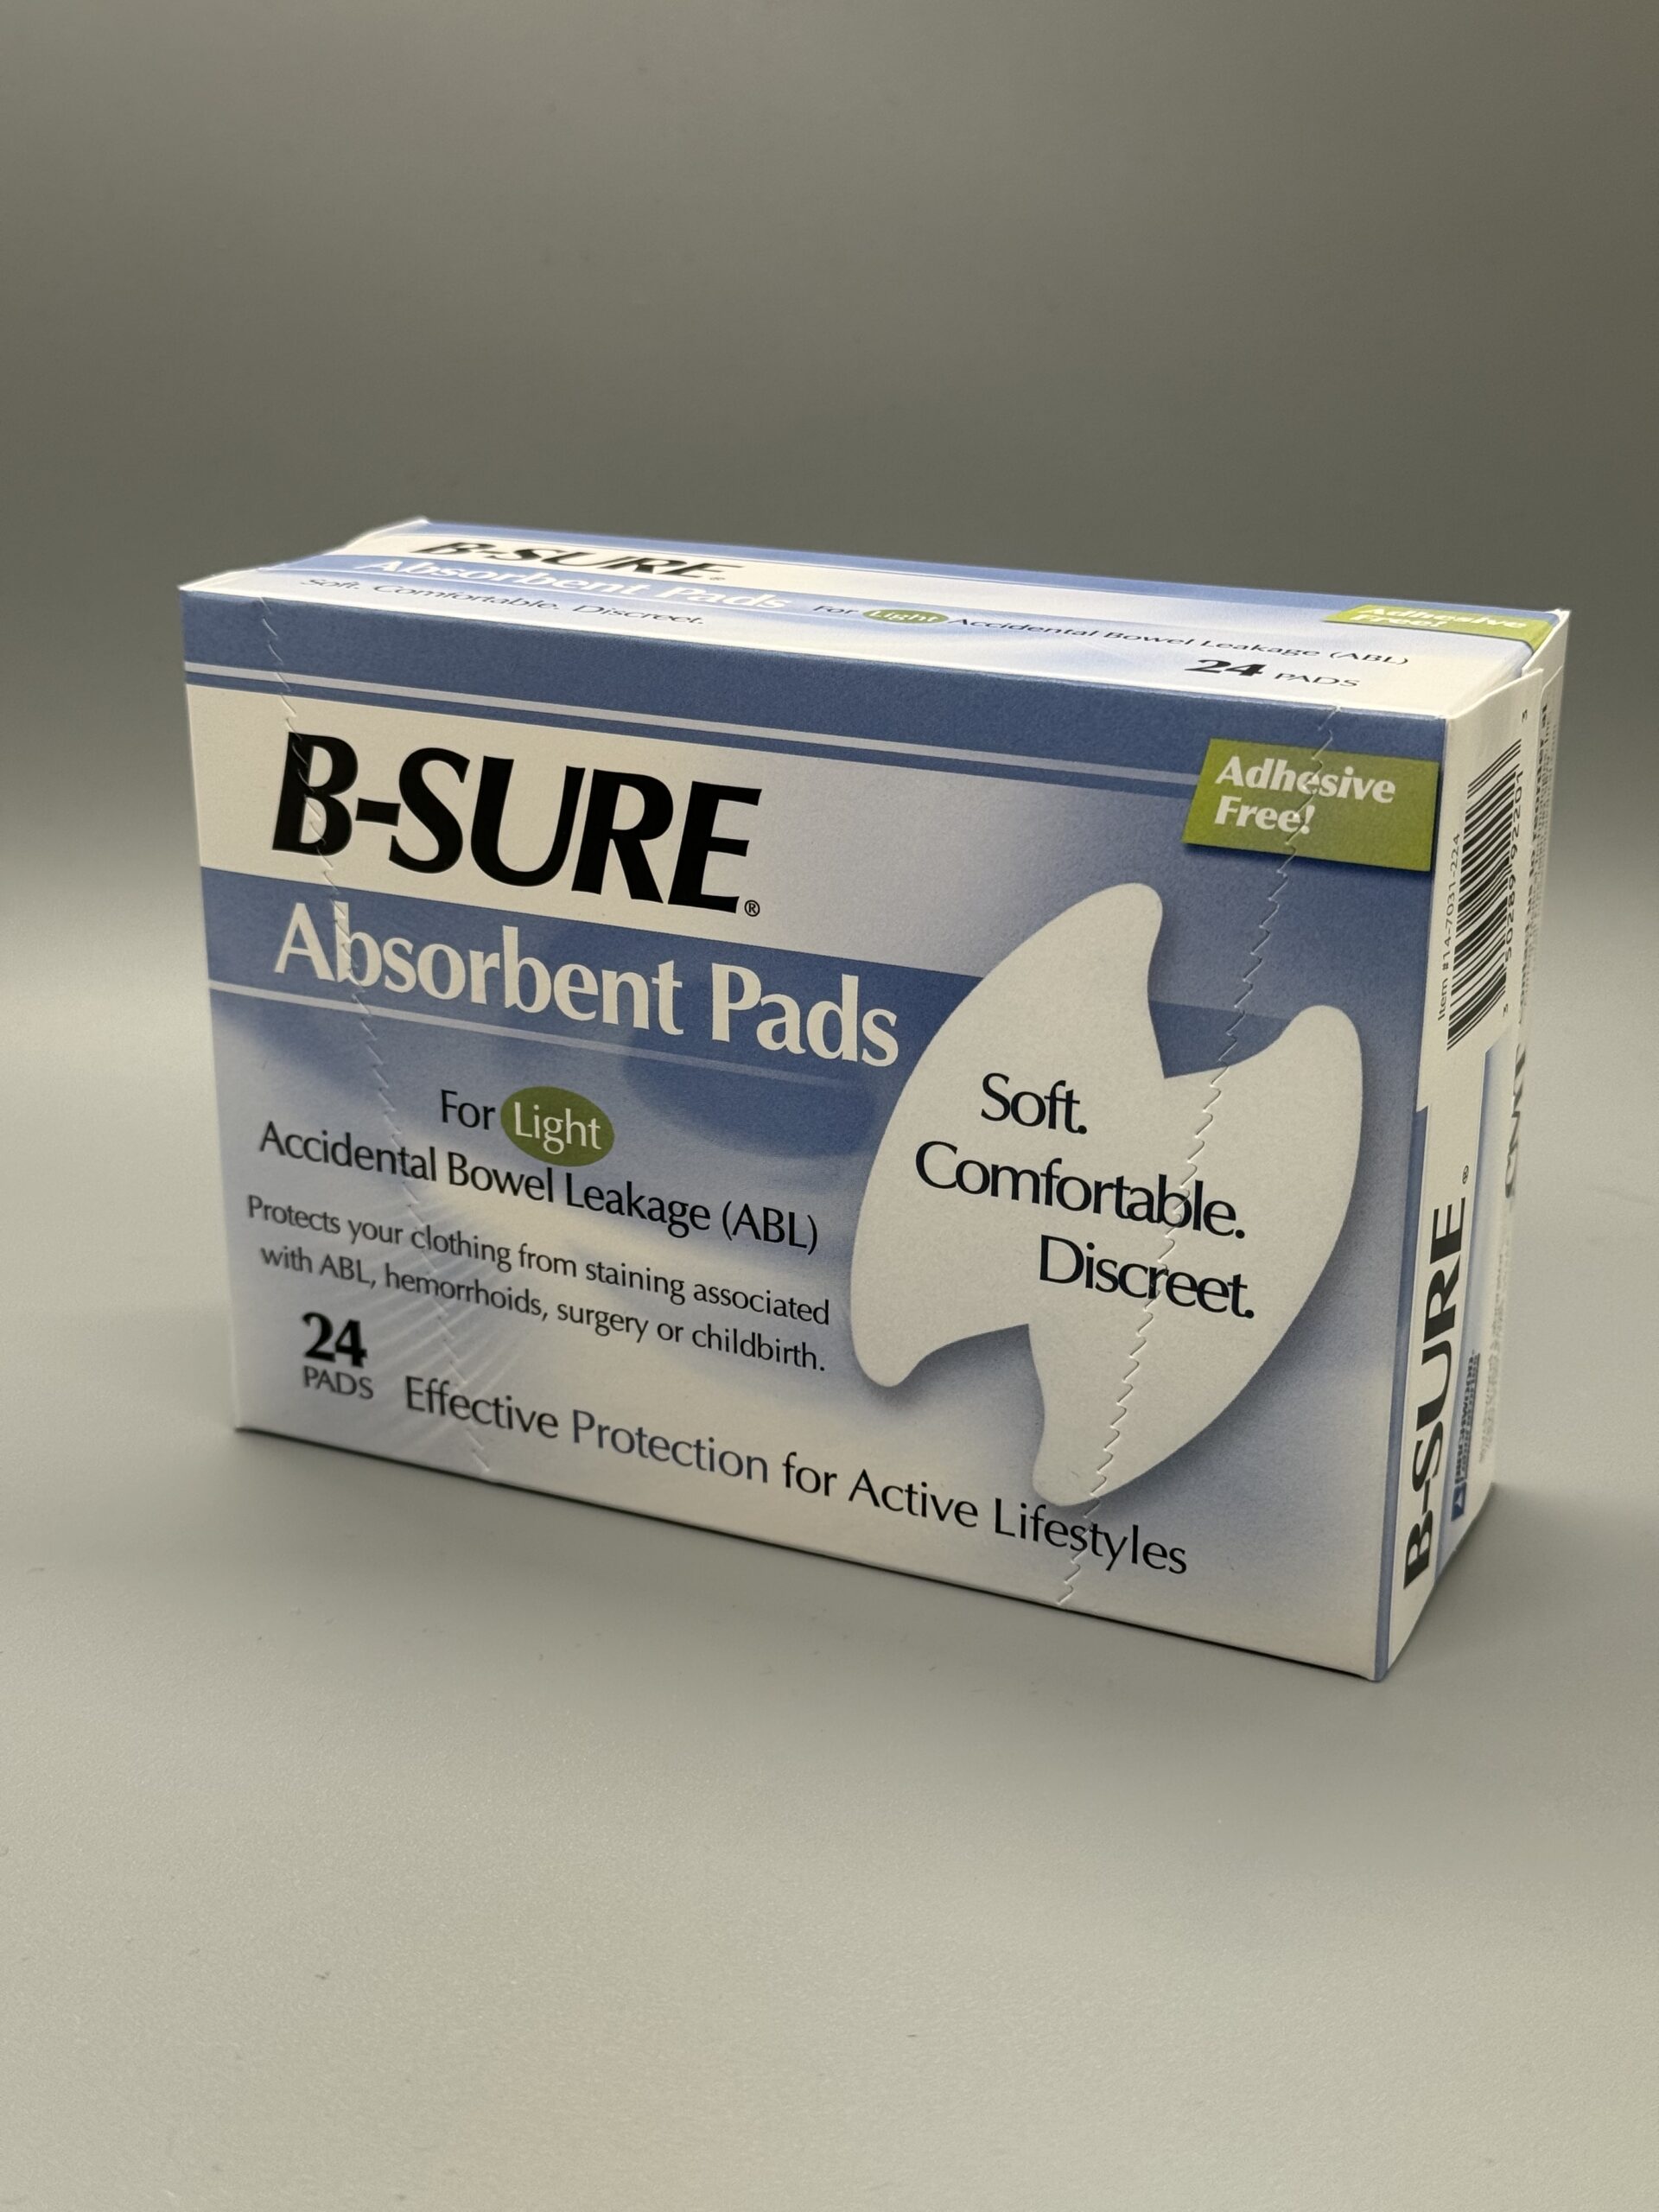 B-SURE Butterfly Absorbent Pads for Bowel Leakage - CMT Medical